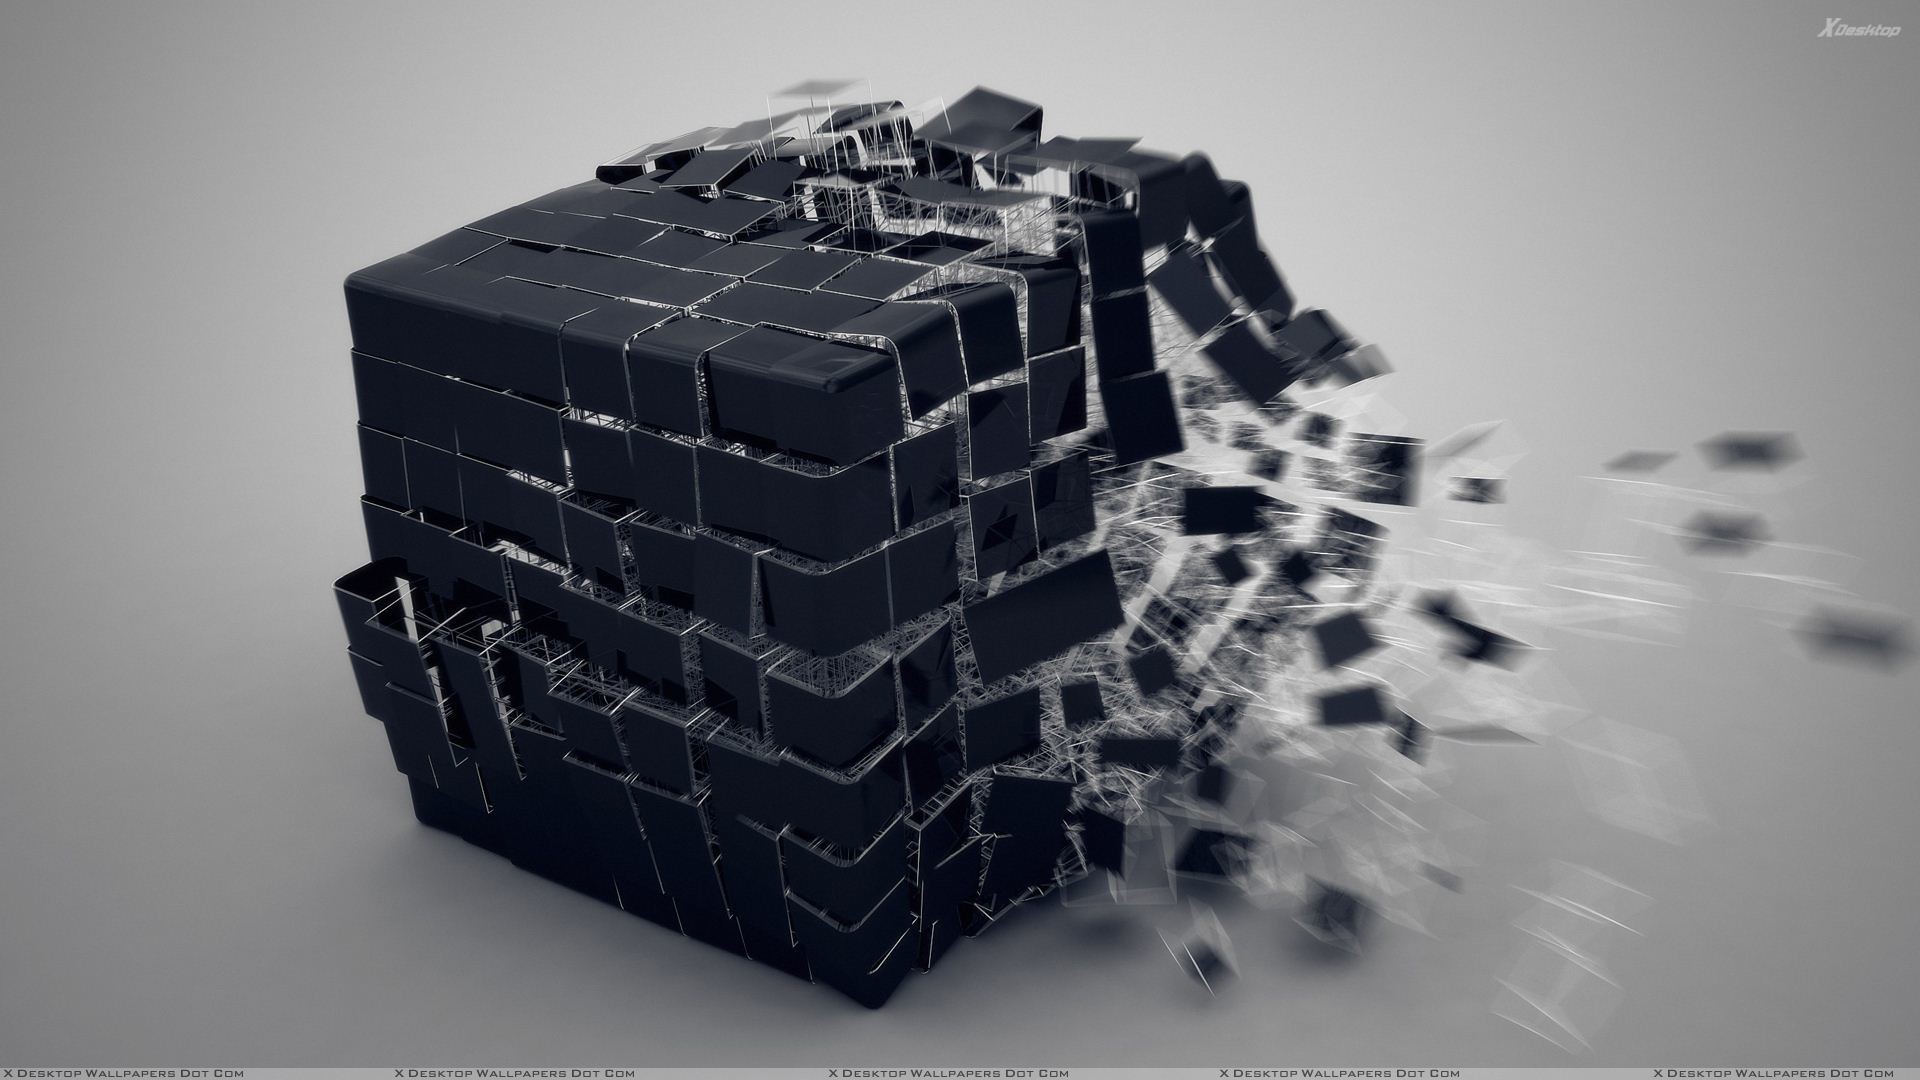 1920x1080 You are viewing wallpaper titled "Destroying Black Cubes" ...